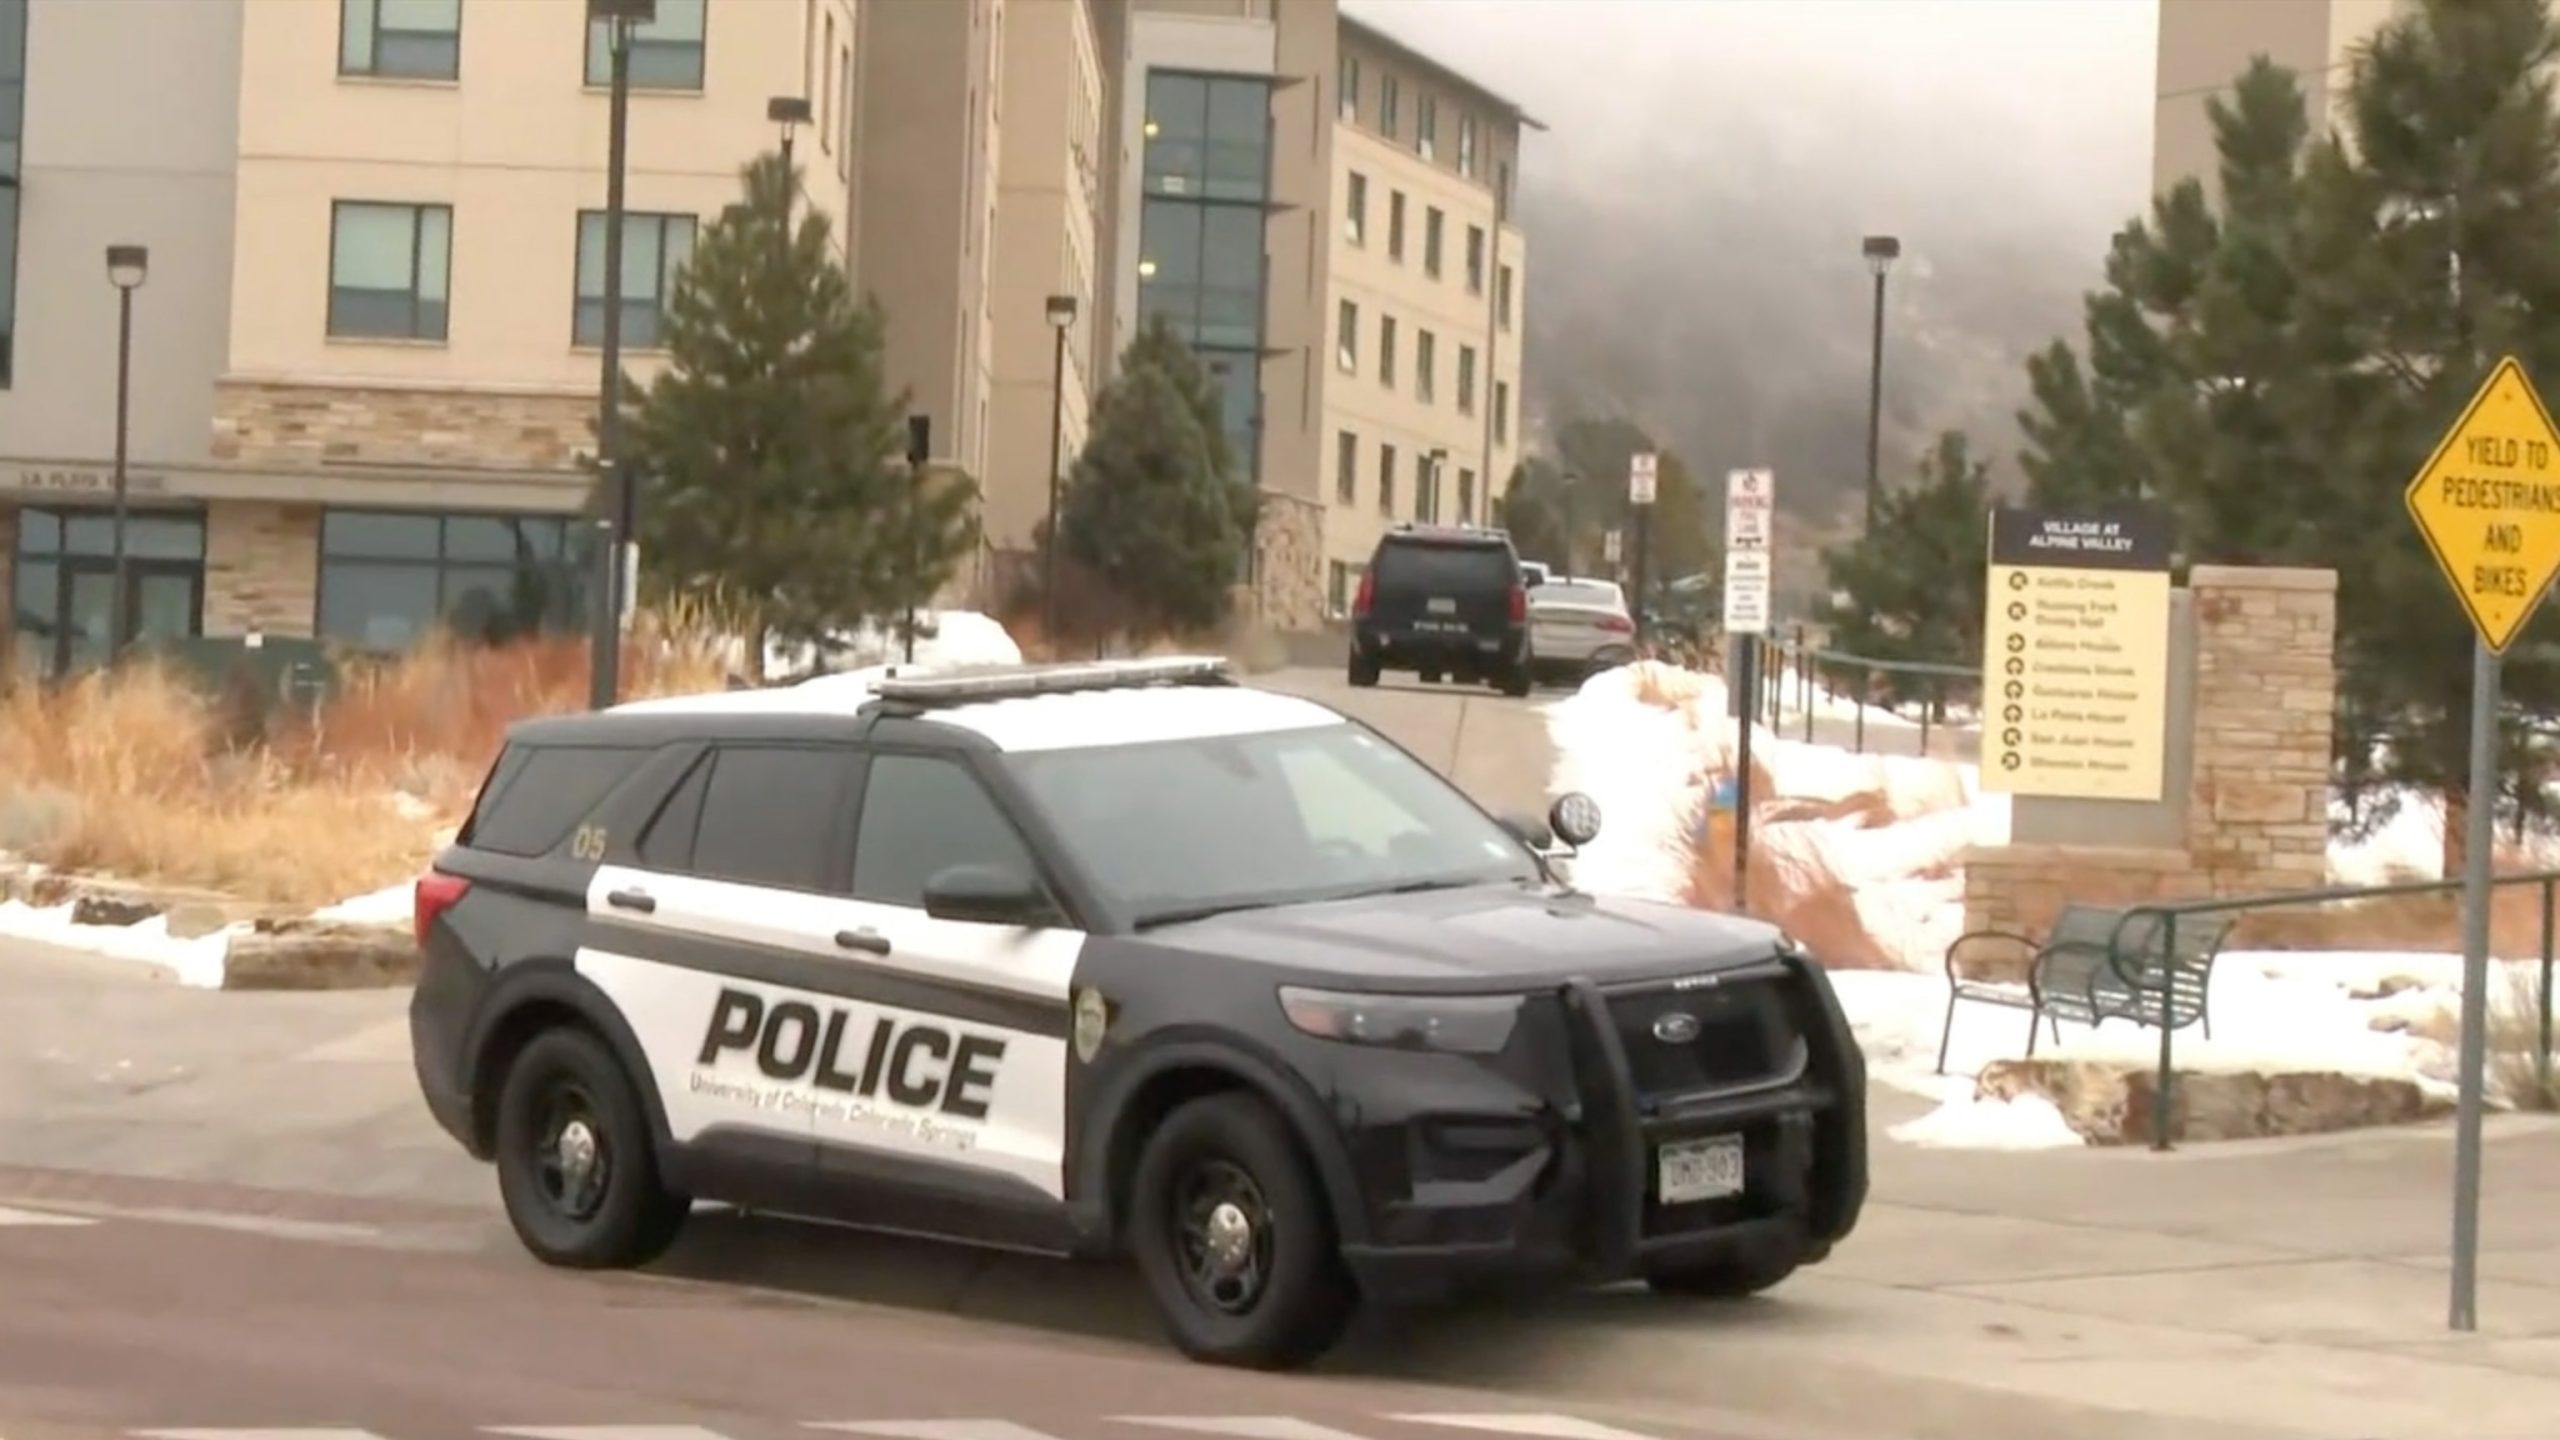 Two individuals discovered deceased with gunshot wounds in dorm room at University of Colorado - Colorado Springs